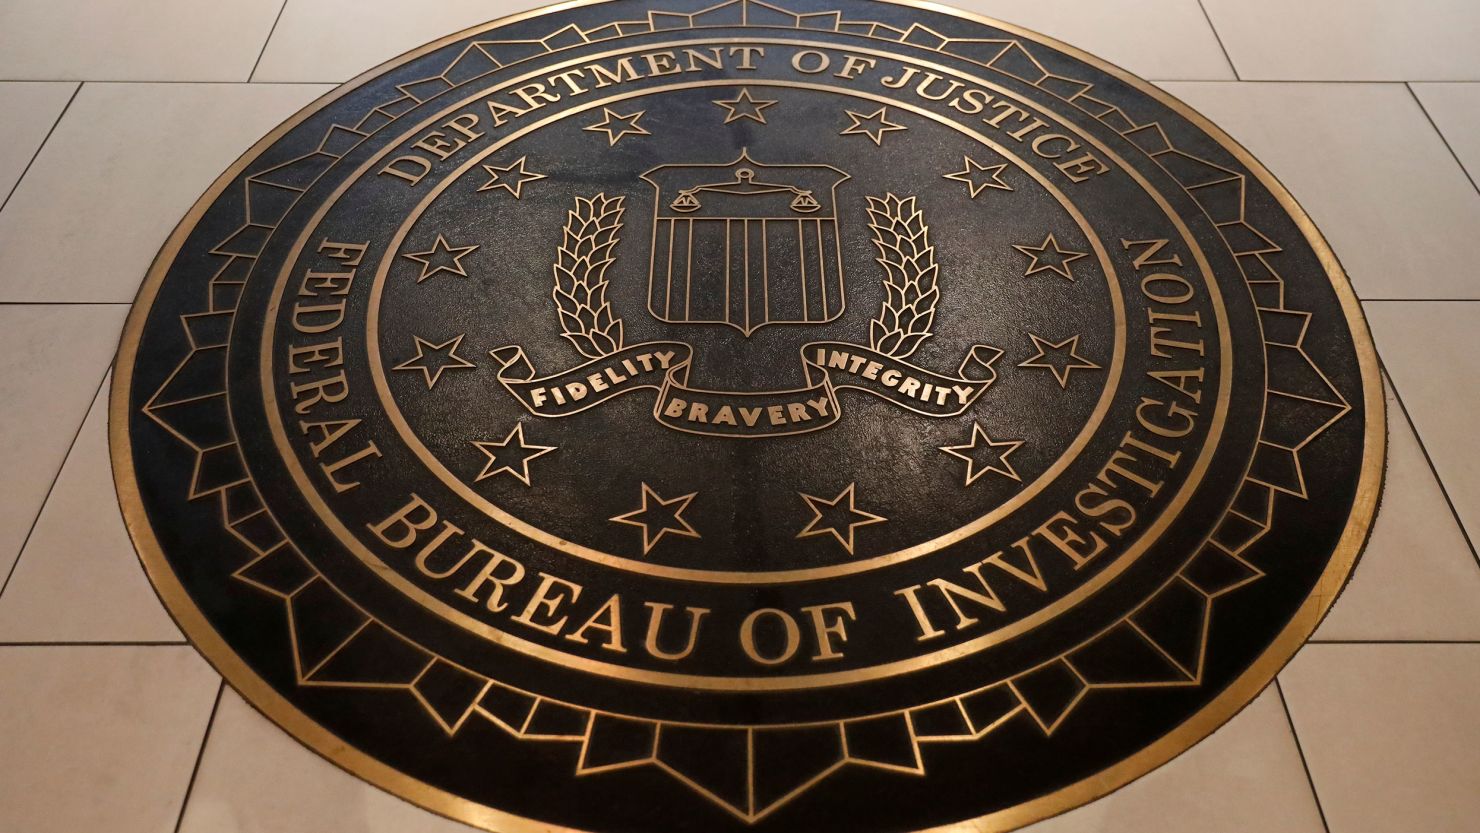 The Federal Bureau of Investigation seal is seen at FBI headquarters in Washington, June 14, 2018.